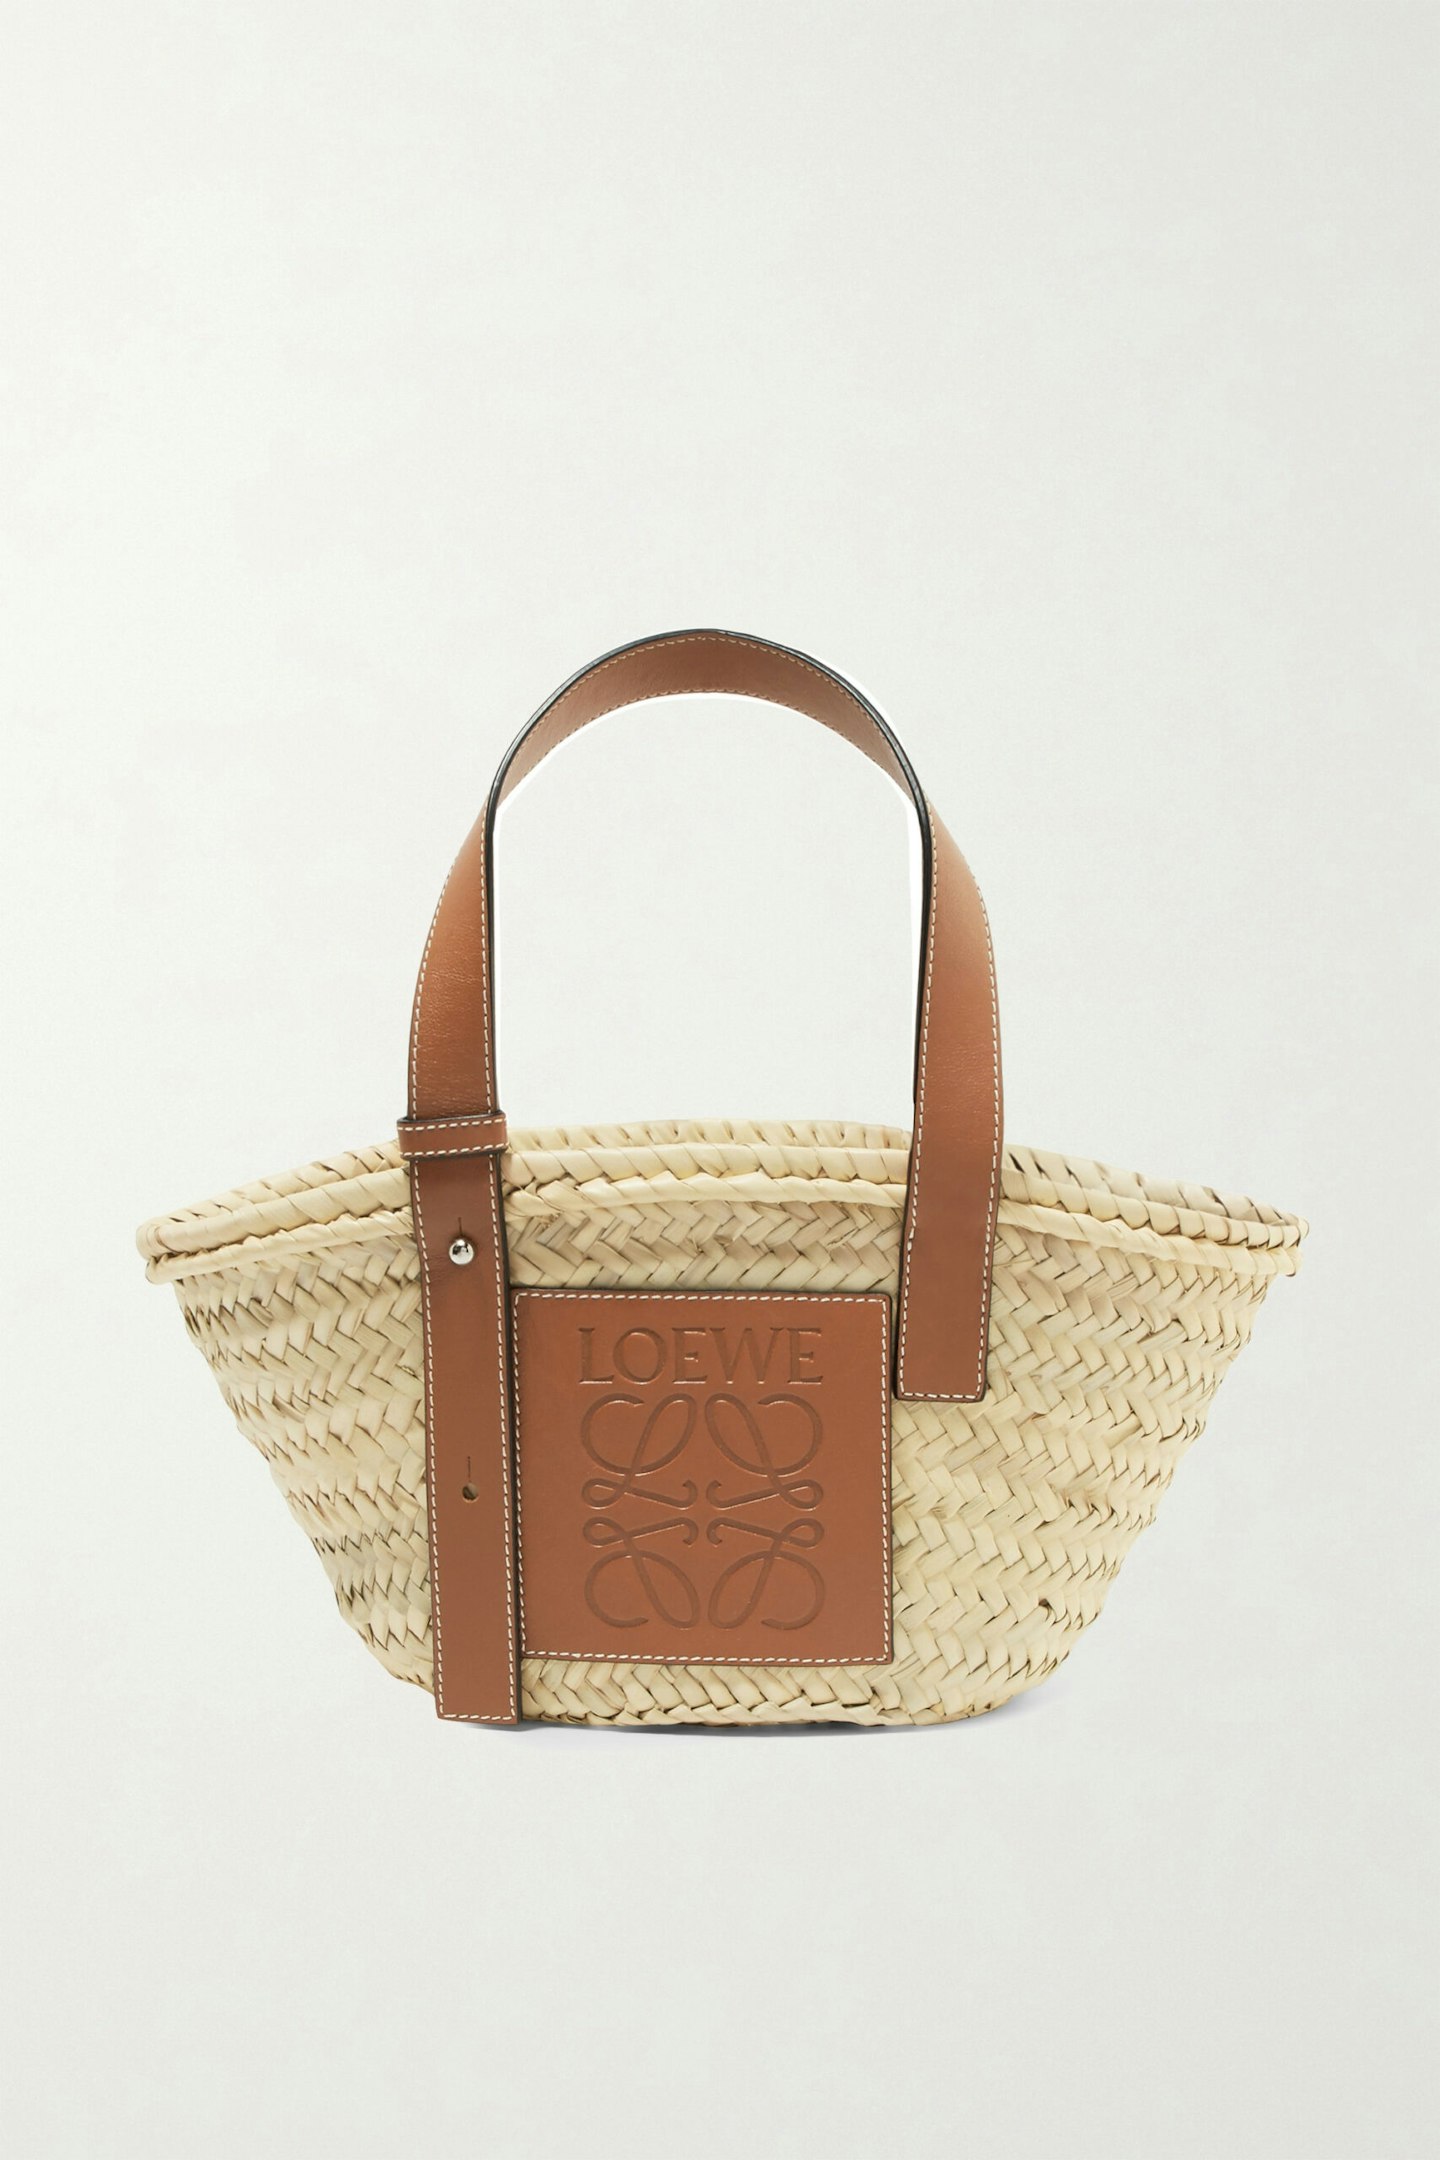 Loewe, Small Leather-Trimmed Woven Raffia Tote